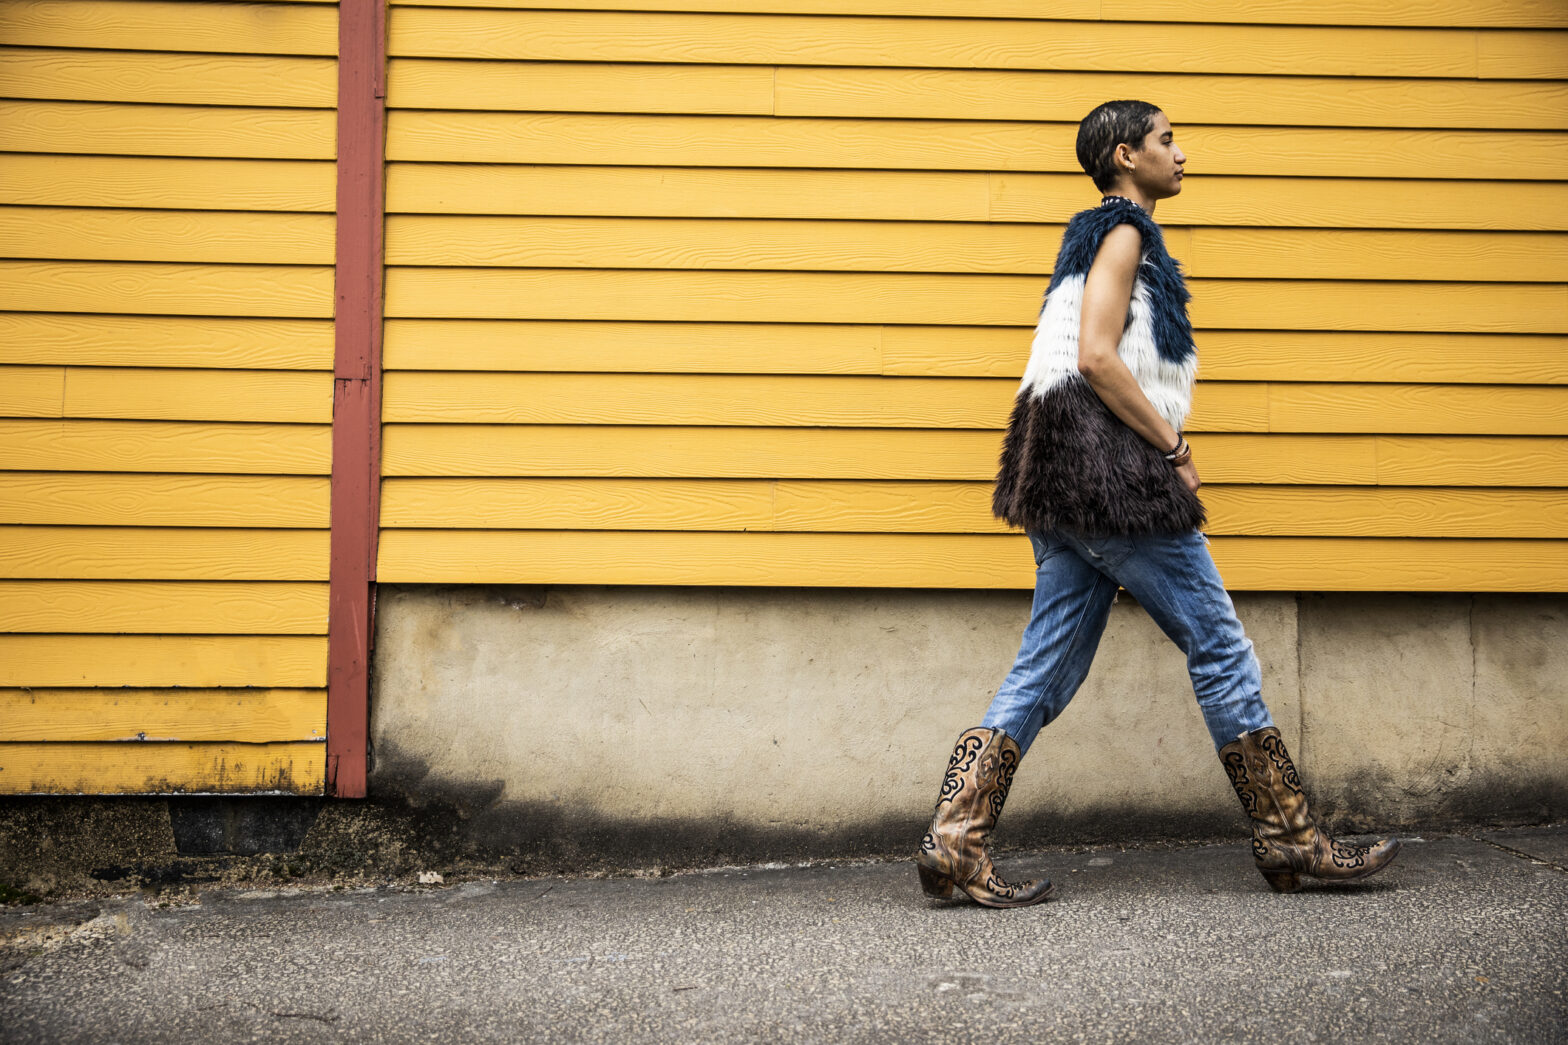 Fashionable young woman walking in front of yellow urban home